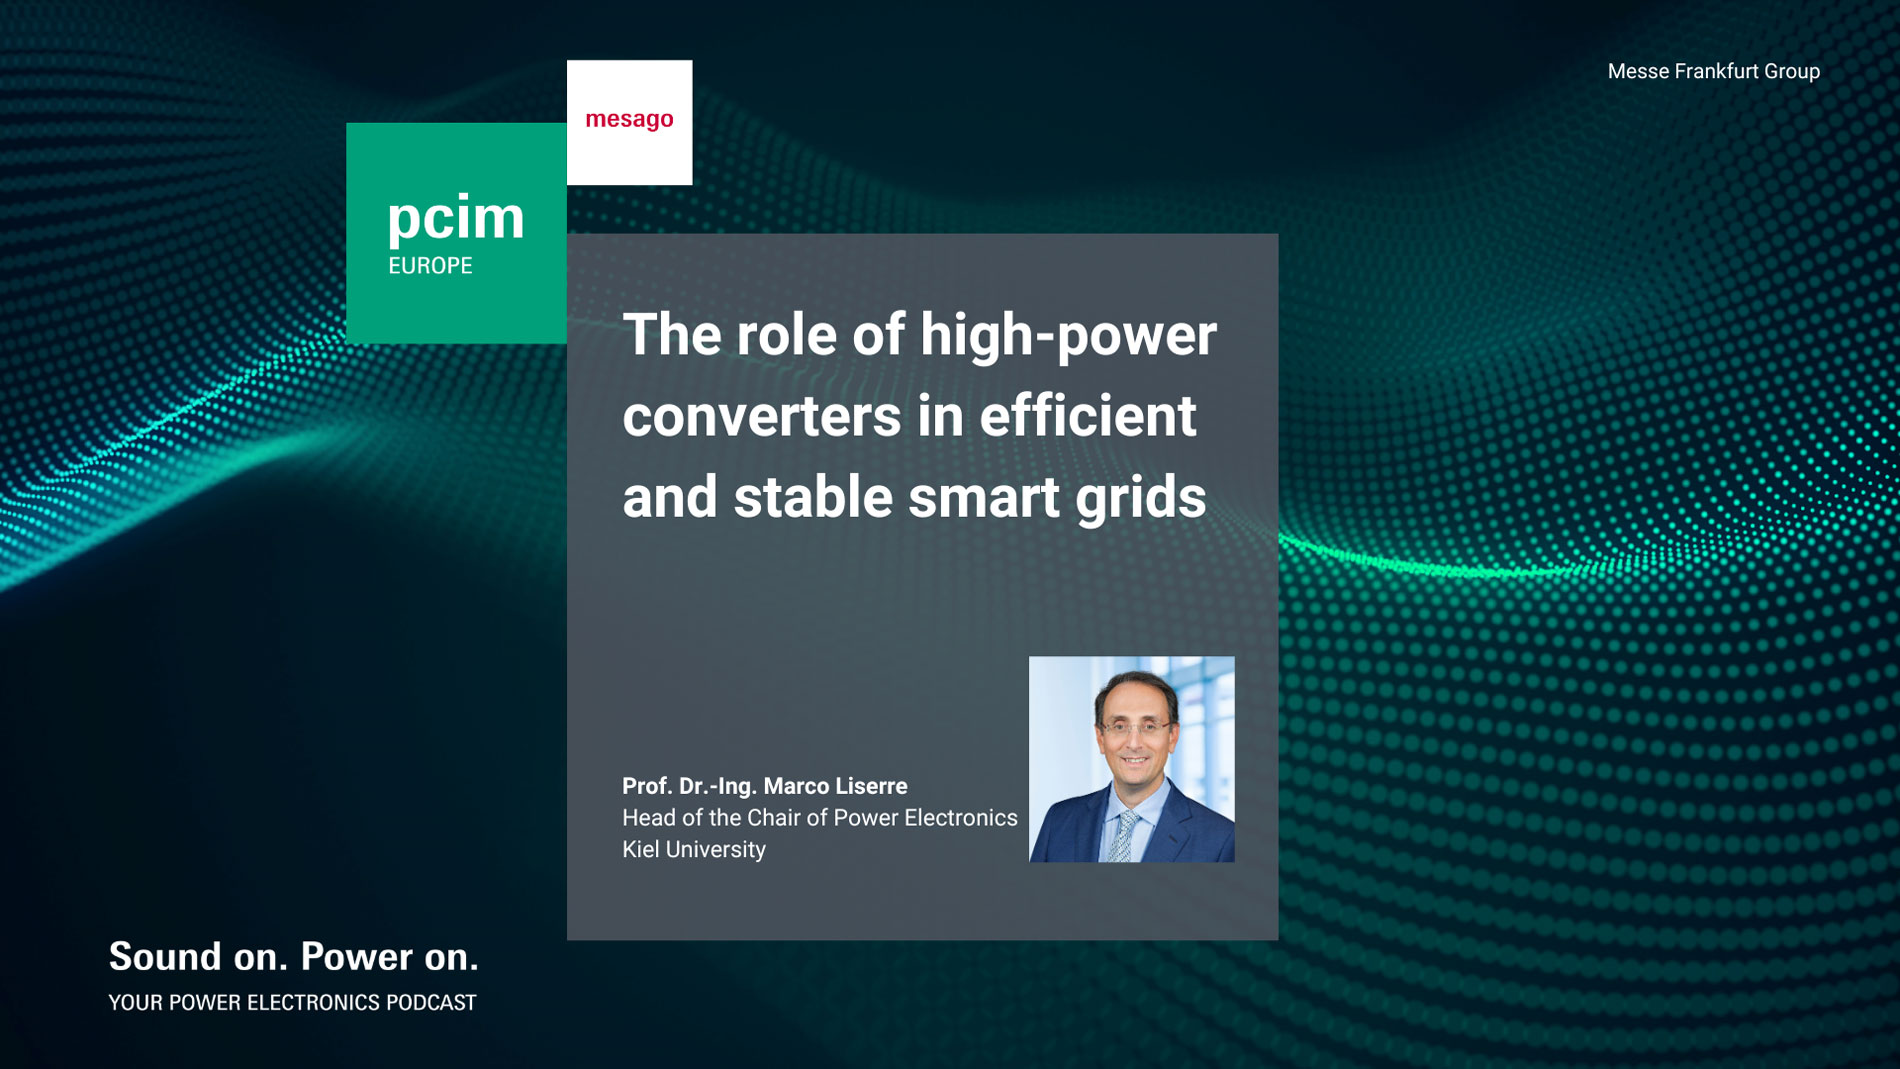 Prof. Dr.-Ing. Marco Liserre from Christian-Albrechts-University of Kiel on the role of high-power converters in efficient and stable smart grids